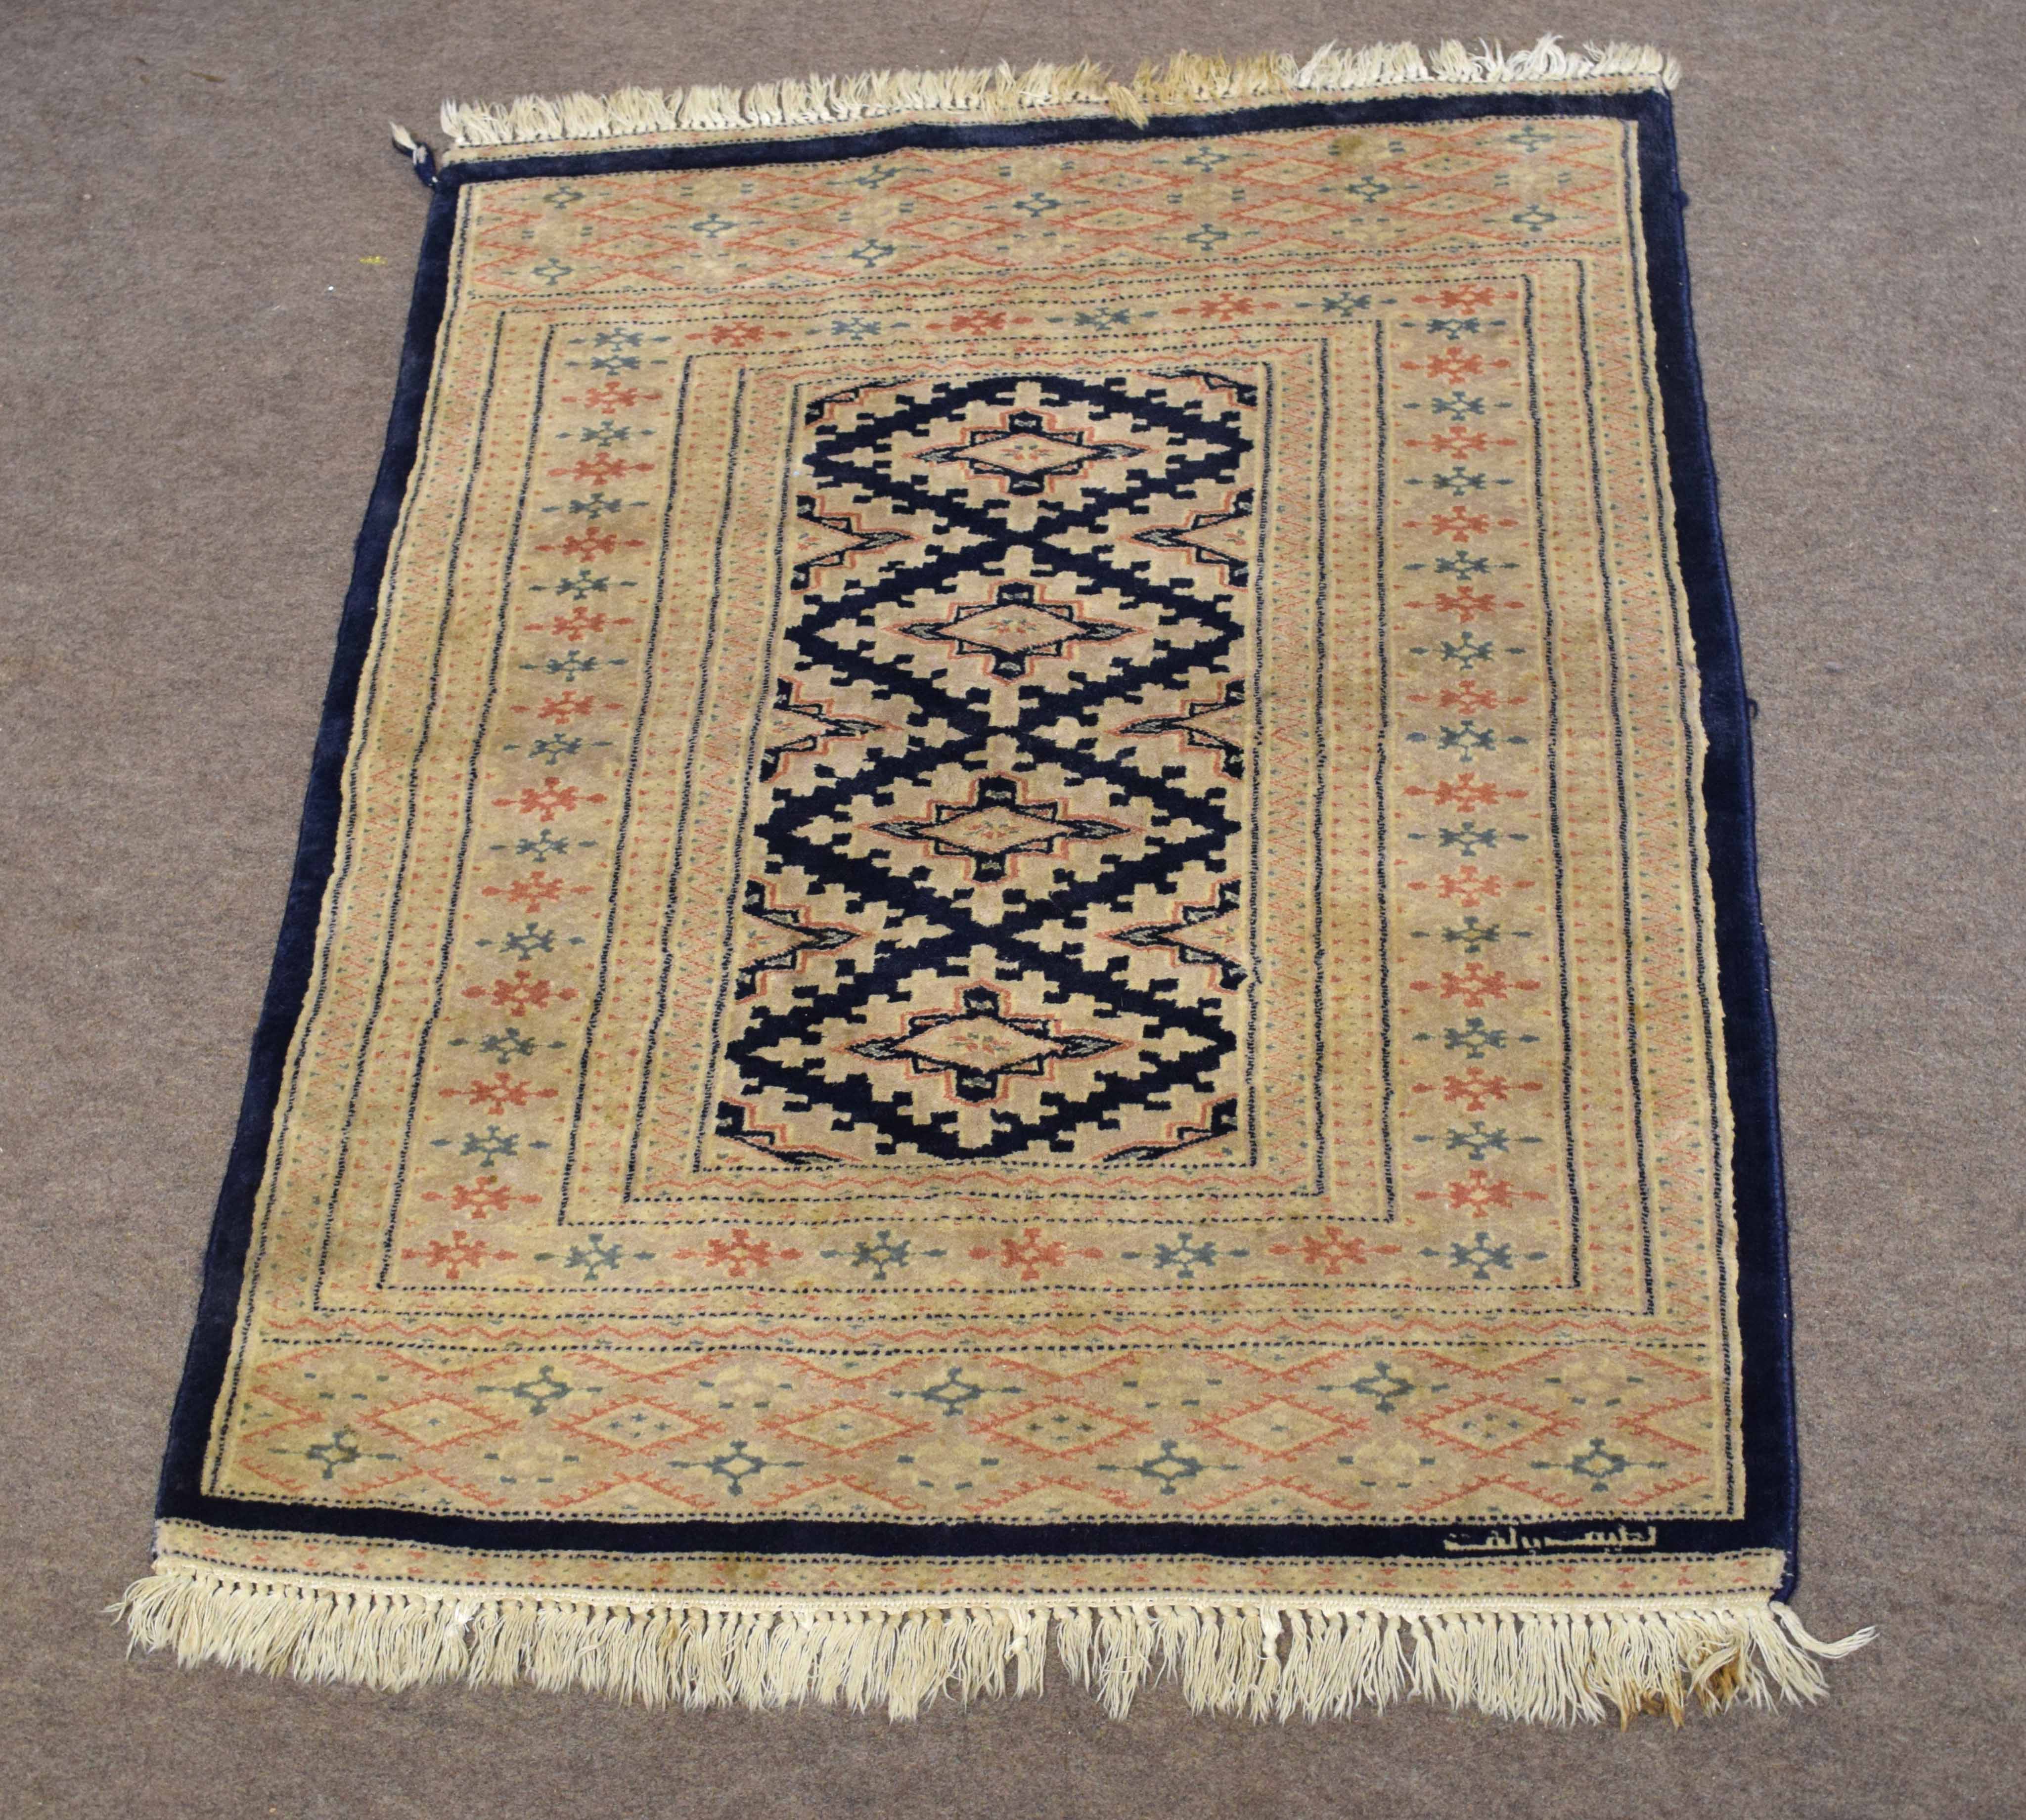 Modern small prayer rug decorated predominantly in cream and blue, with repeating diamond centre